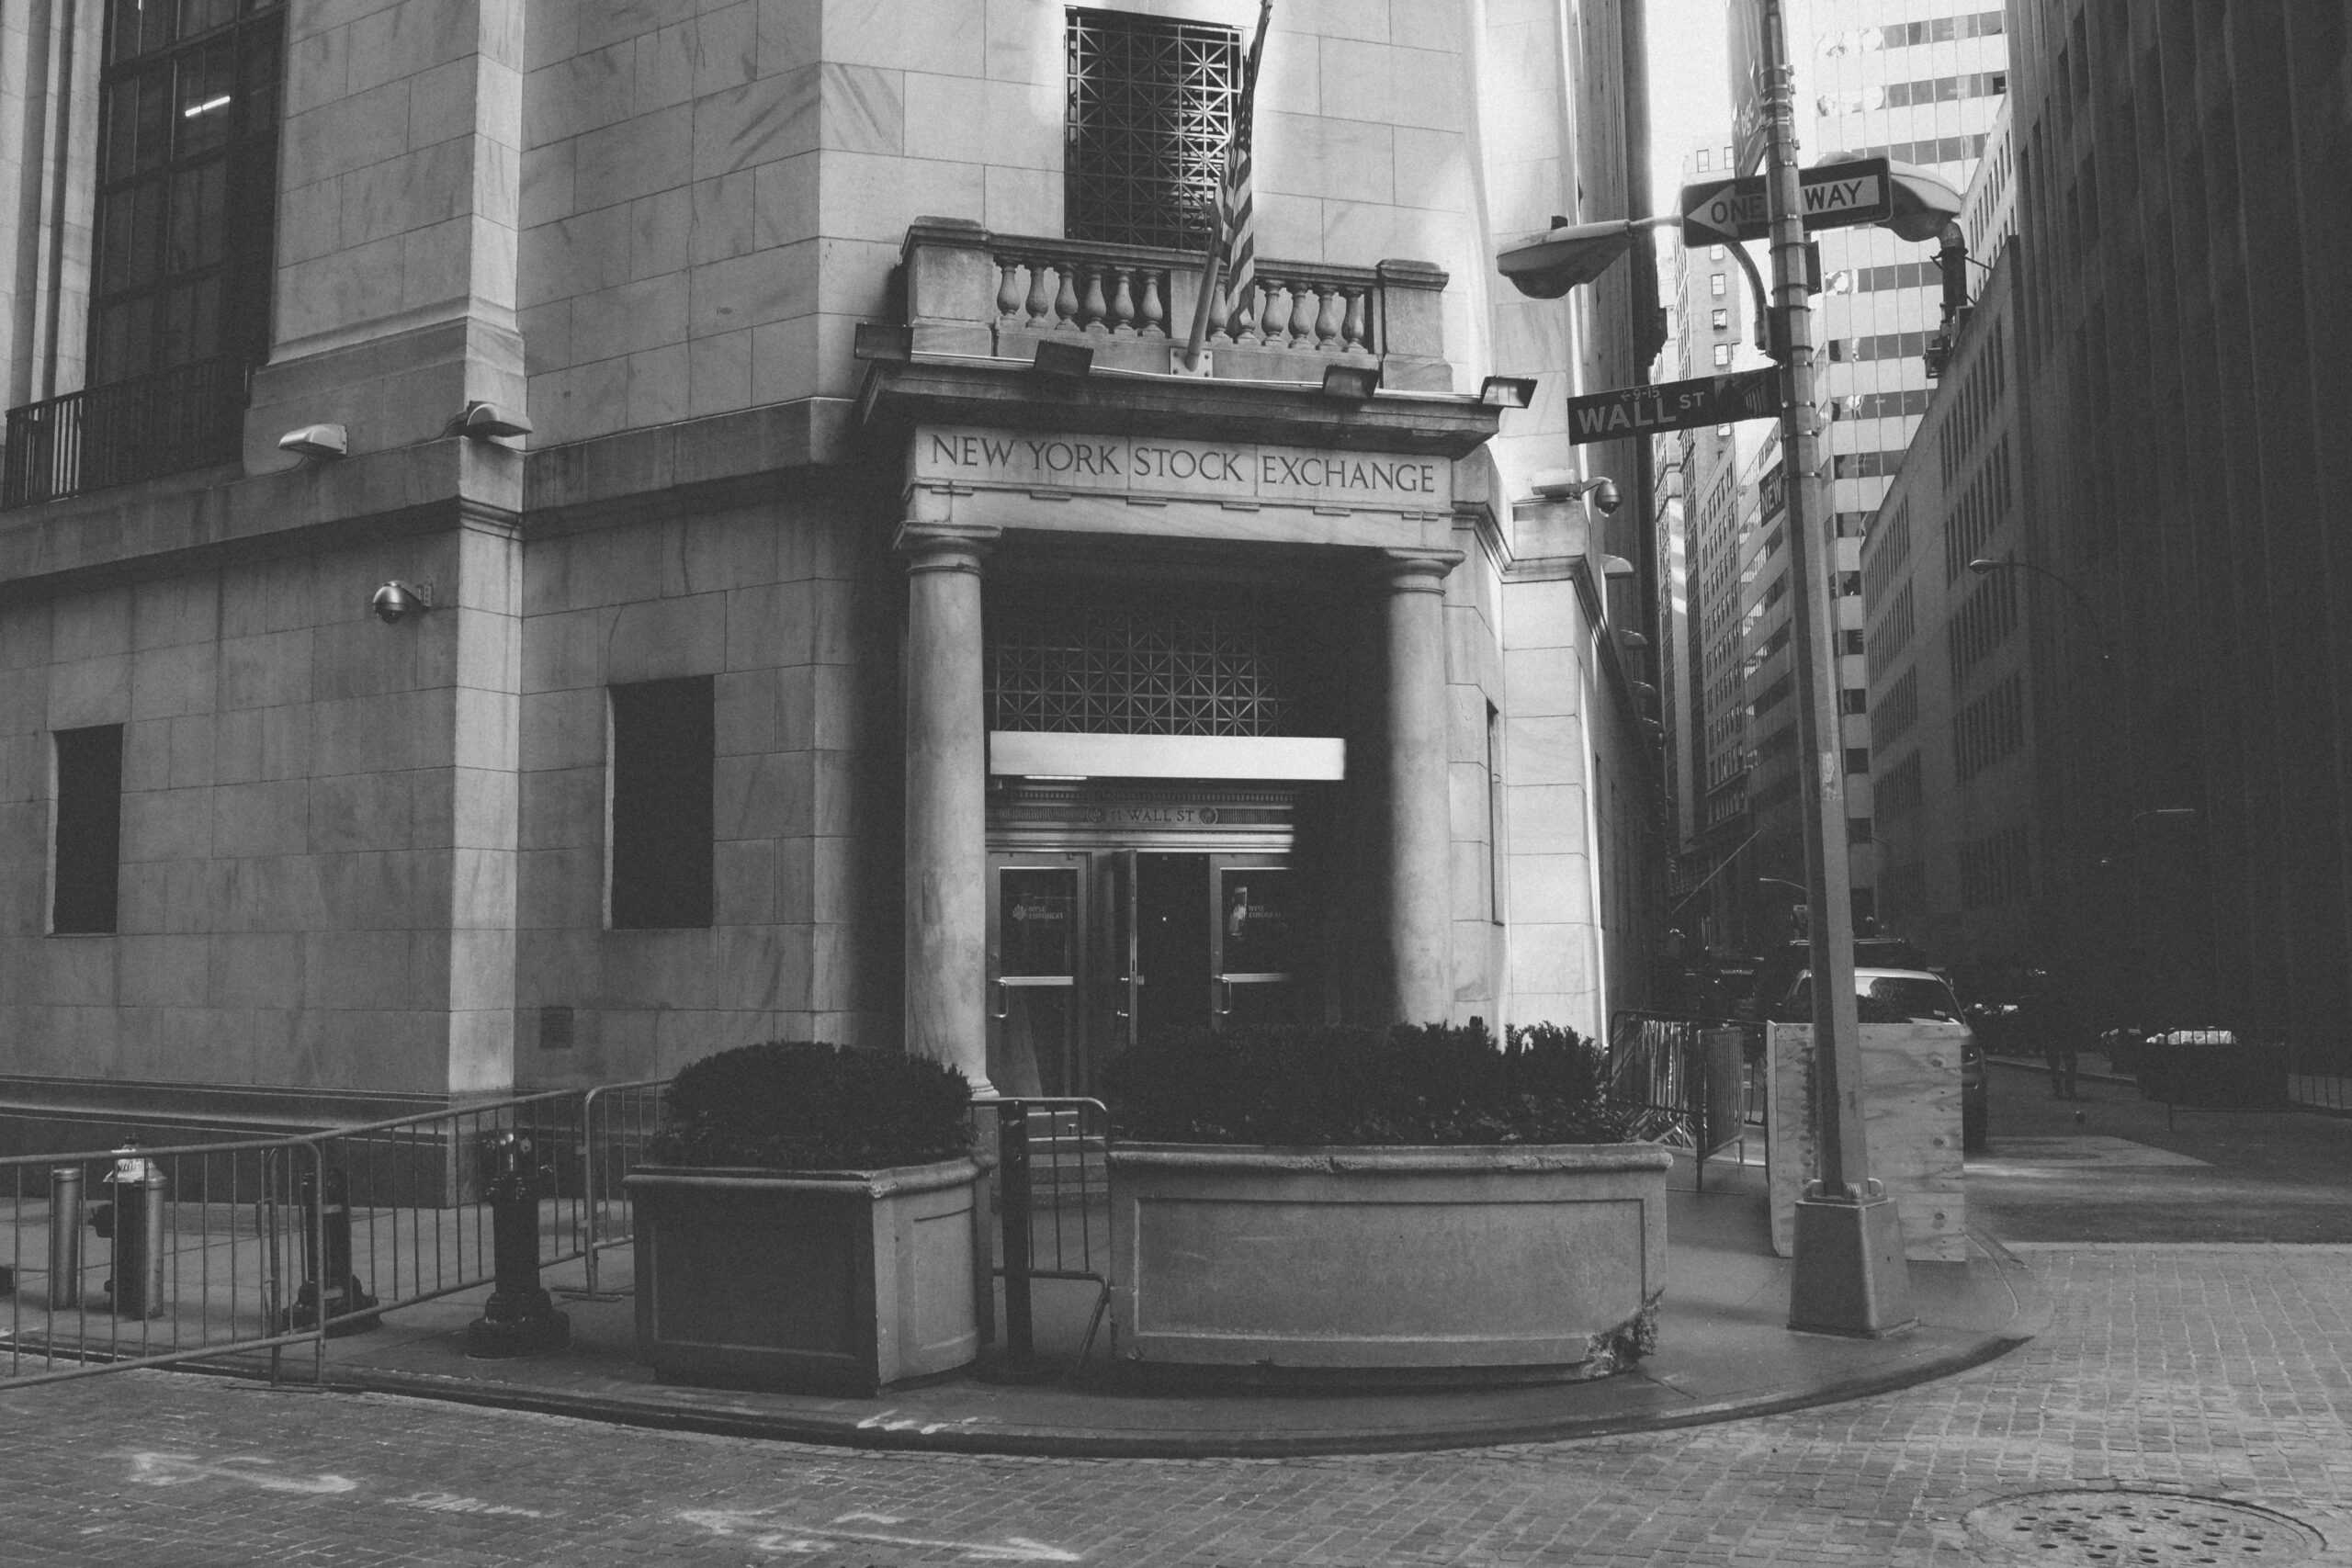 New York Stock Exchange building entrance in black and white